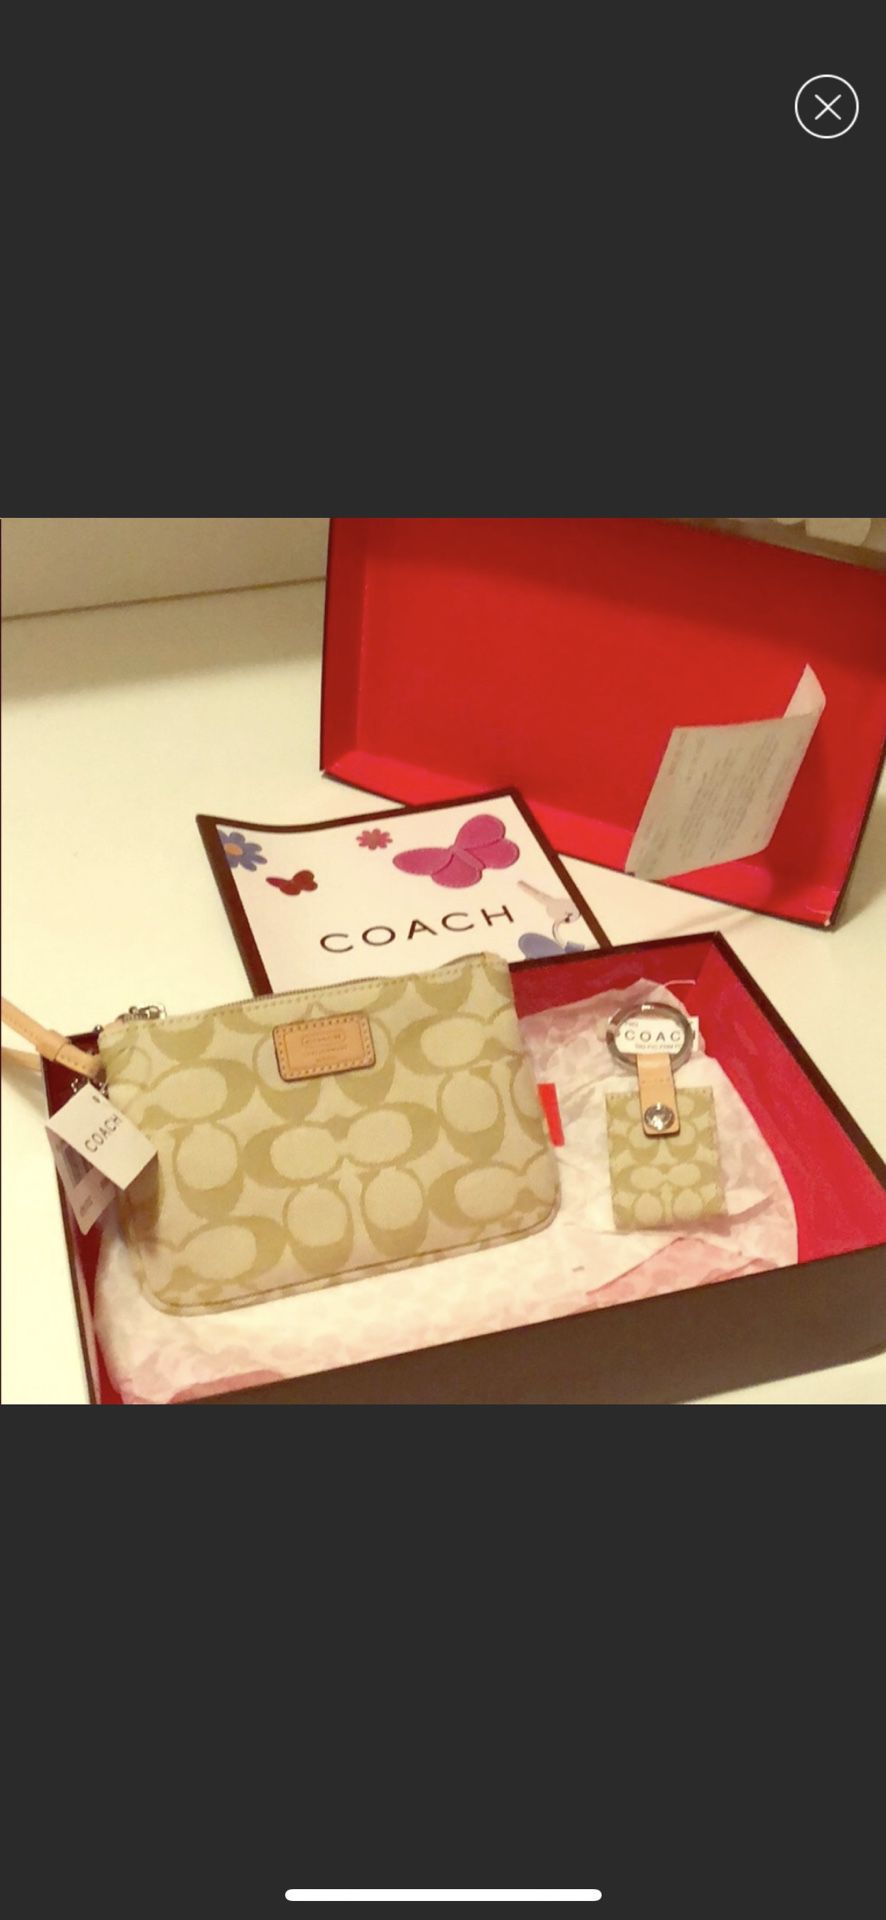 Coach brand new wristlets with Kay chain